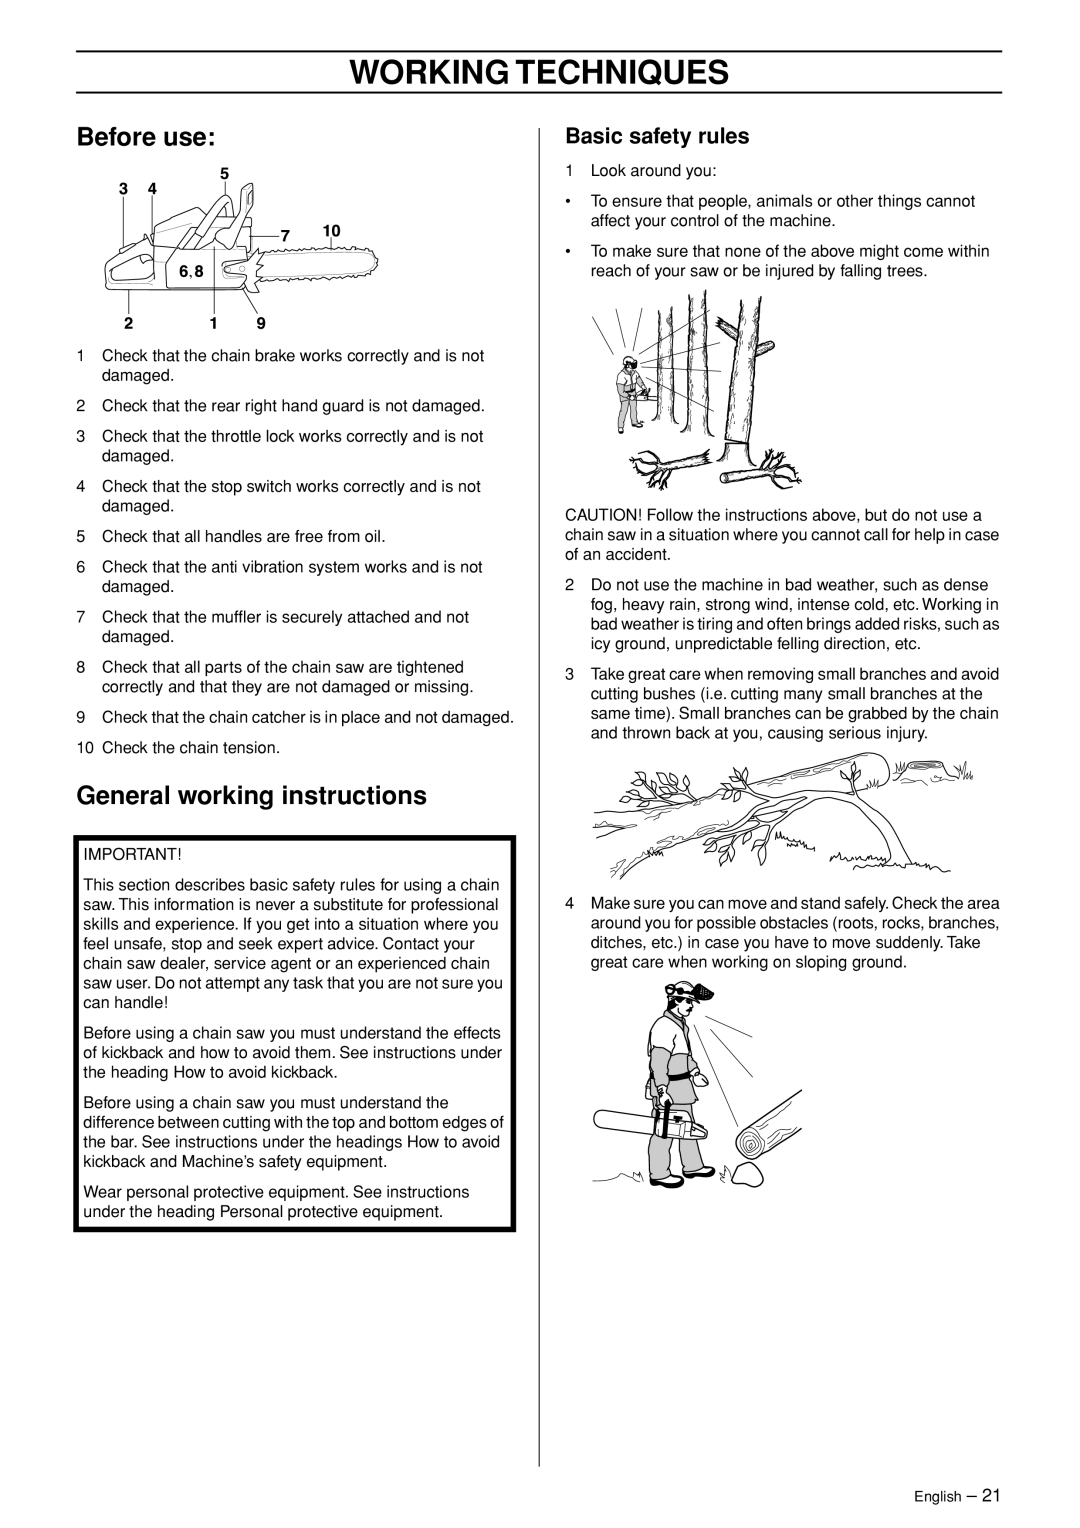 Husqvarna 336 manual Working Techniques, Before use, General working instructions, Basic safety rules 